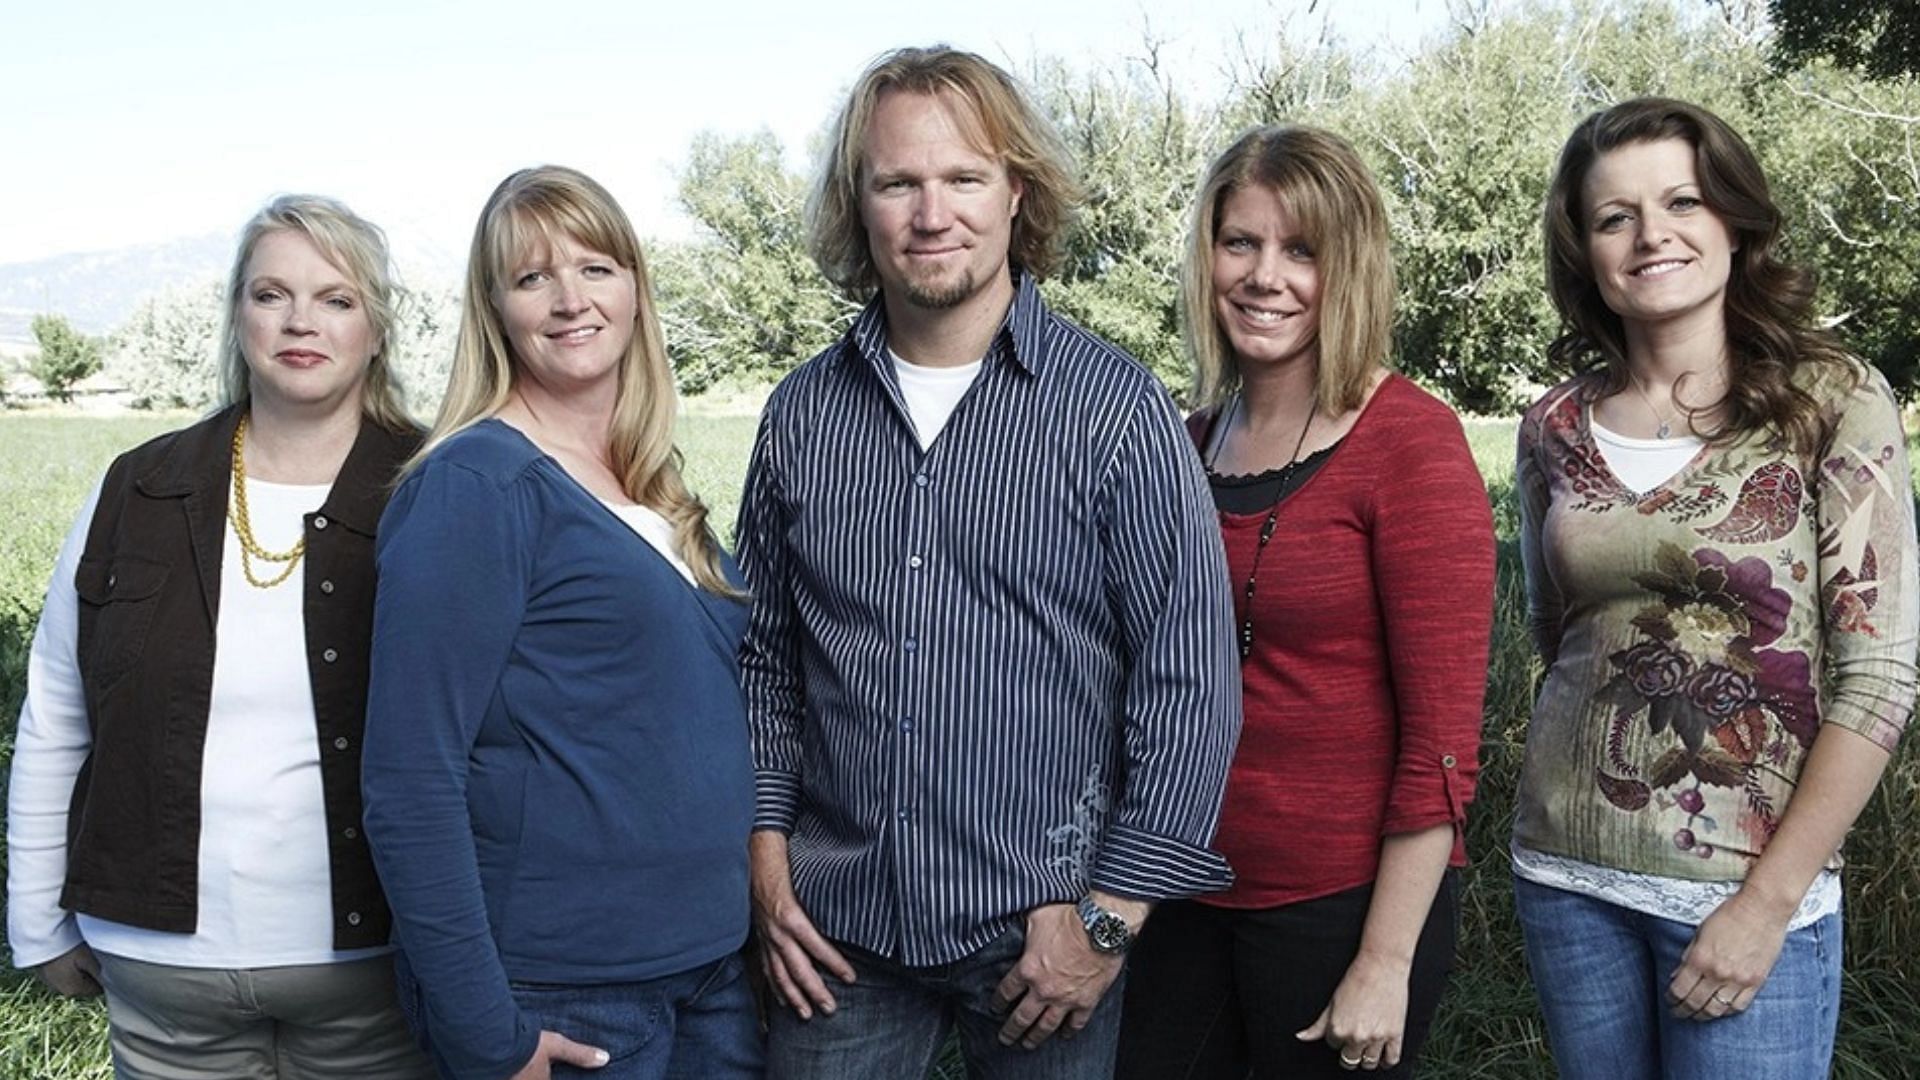 How many times did Sister Wives star Kody Brown get married? Meet his